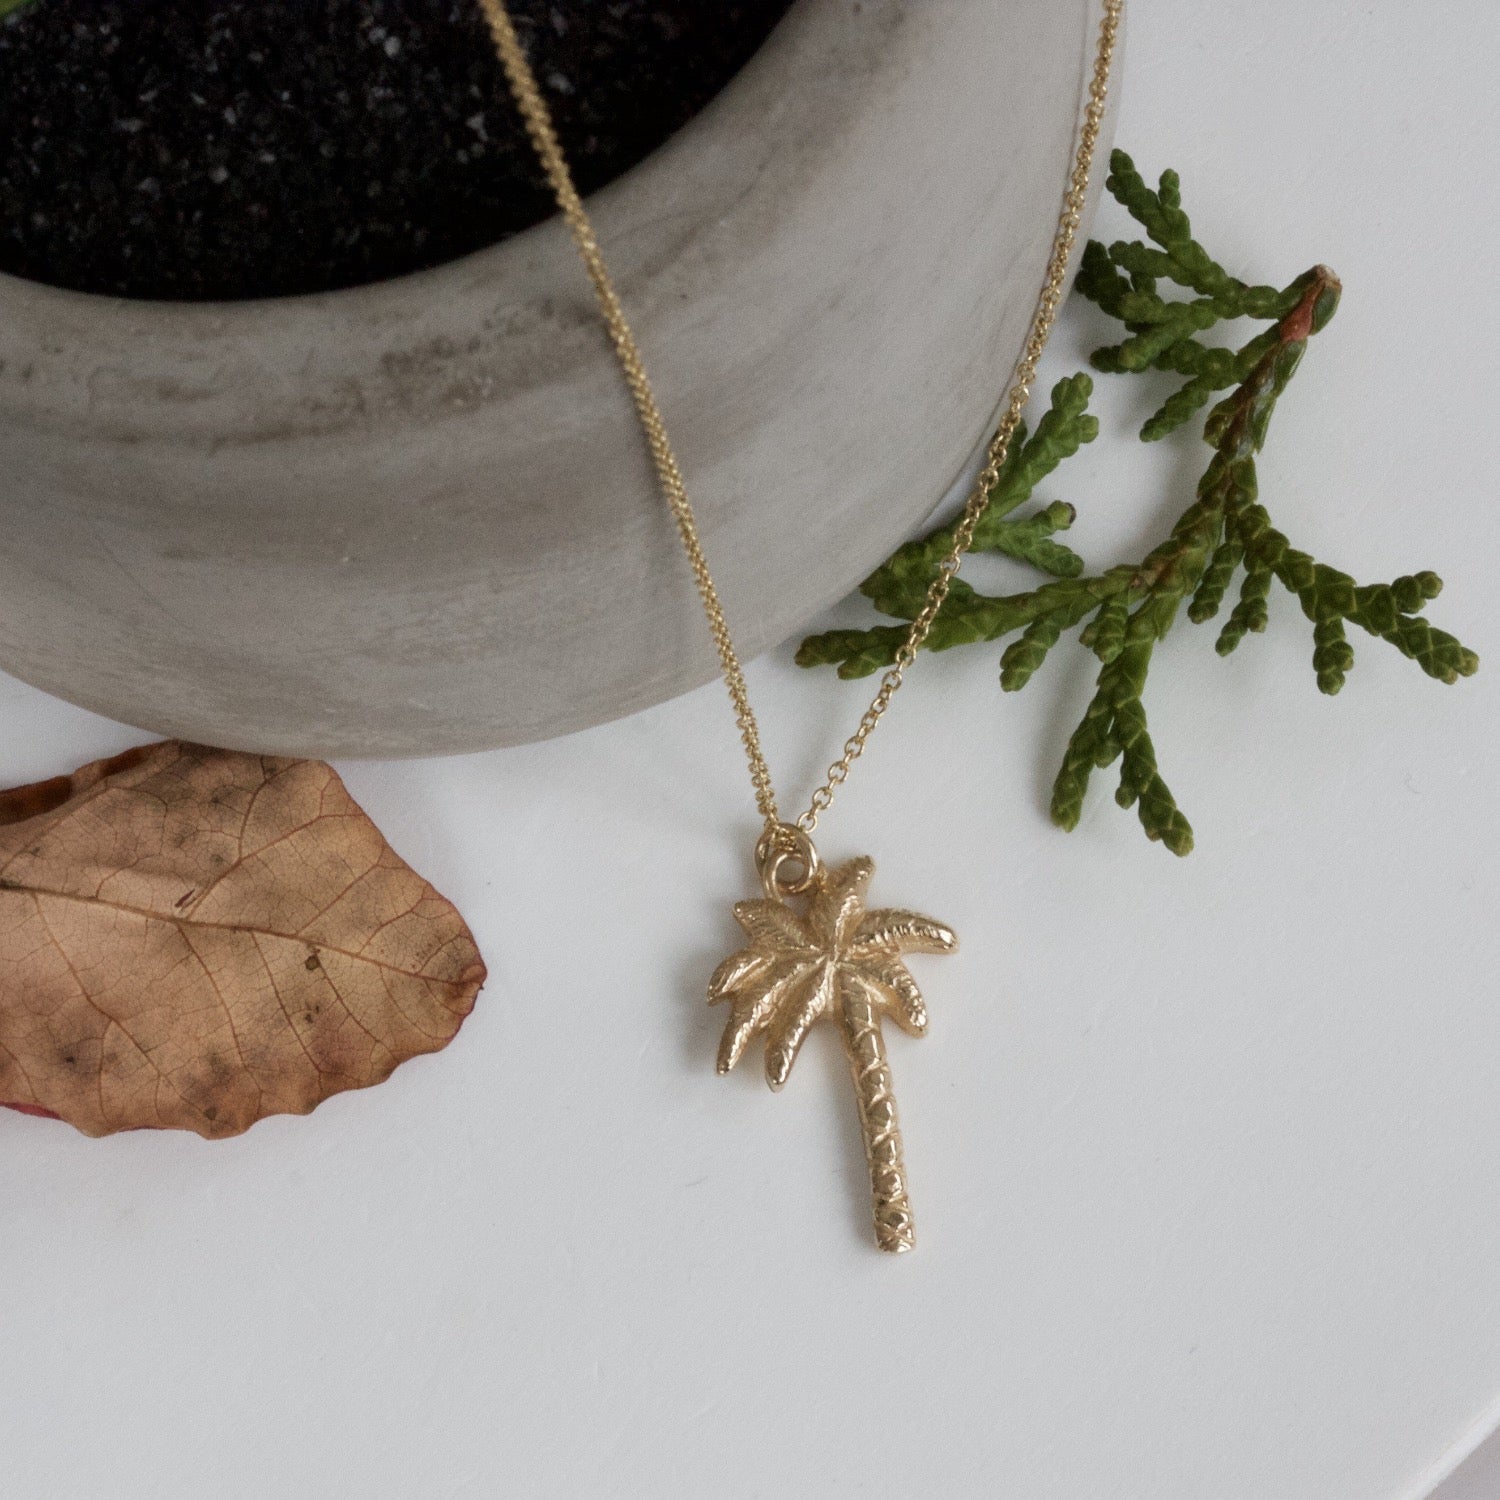 Solid 9ct Gold Palm Tree Necklace, Gold Palm Tree Pendant on a